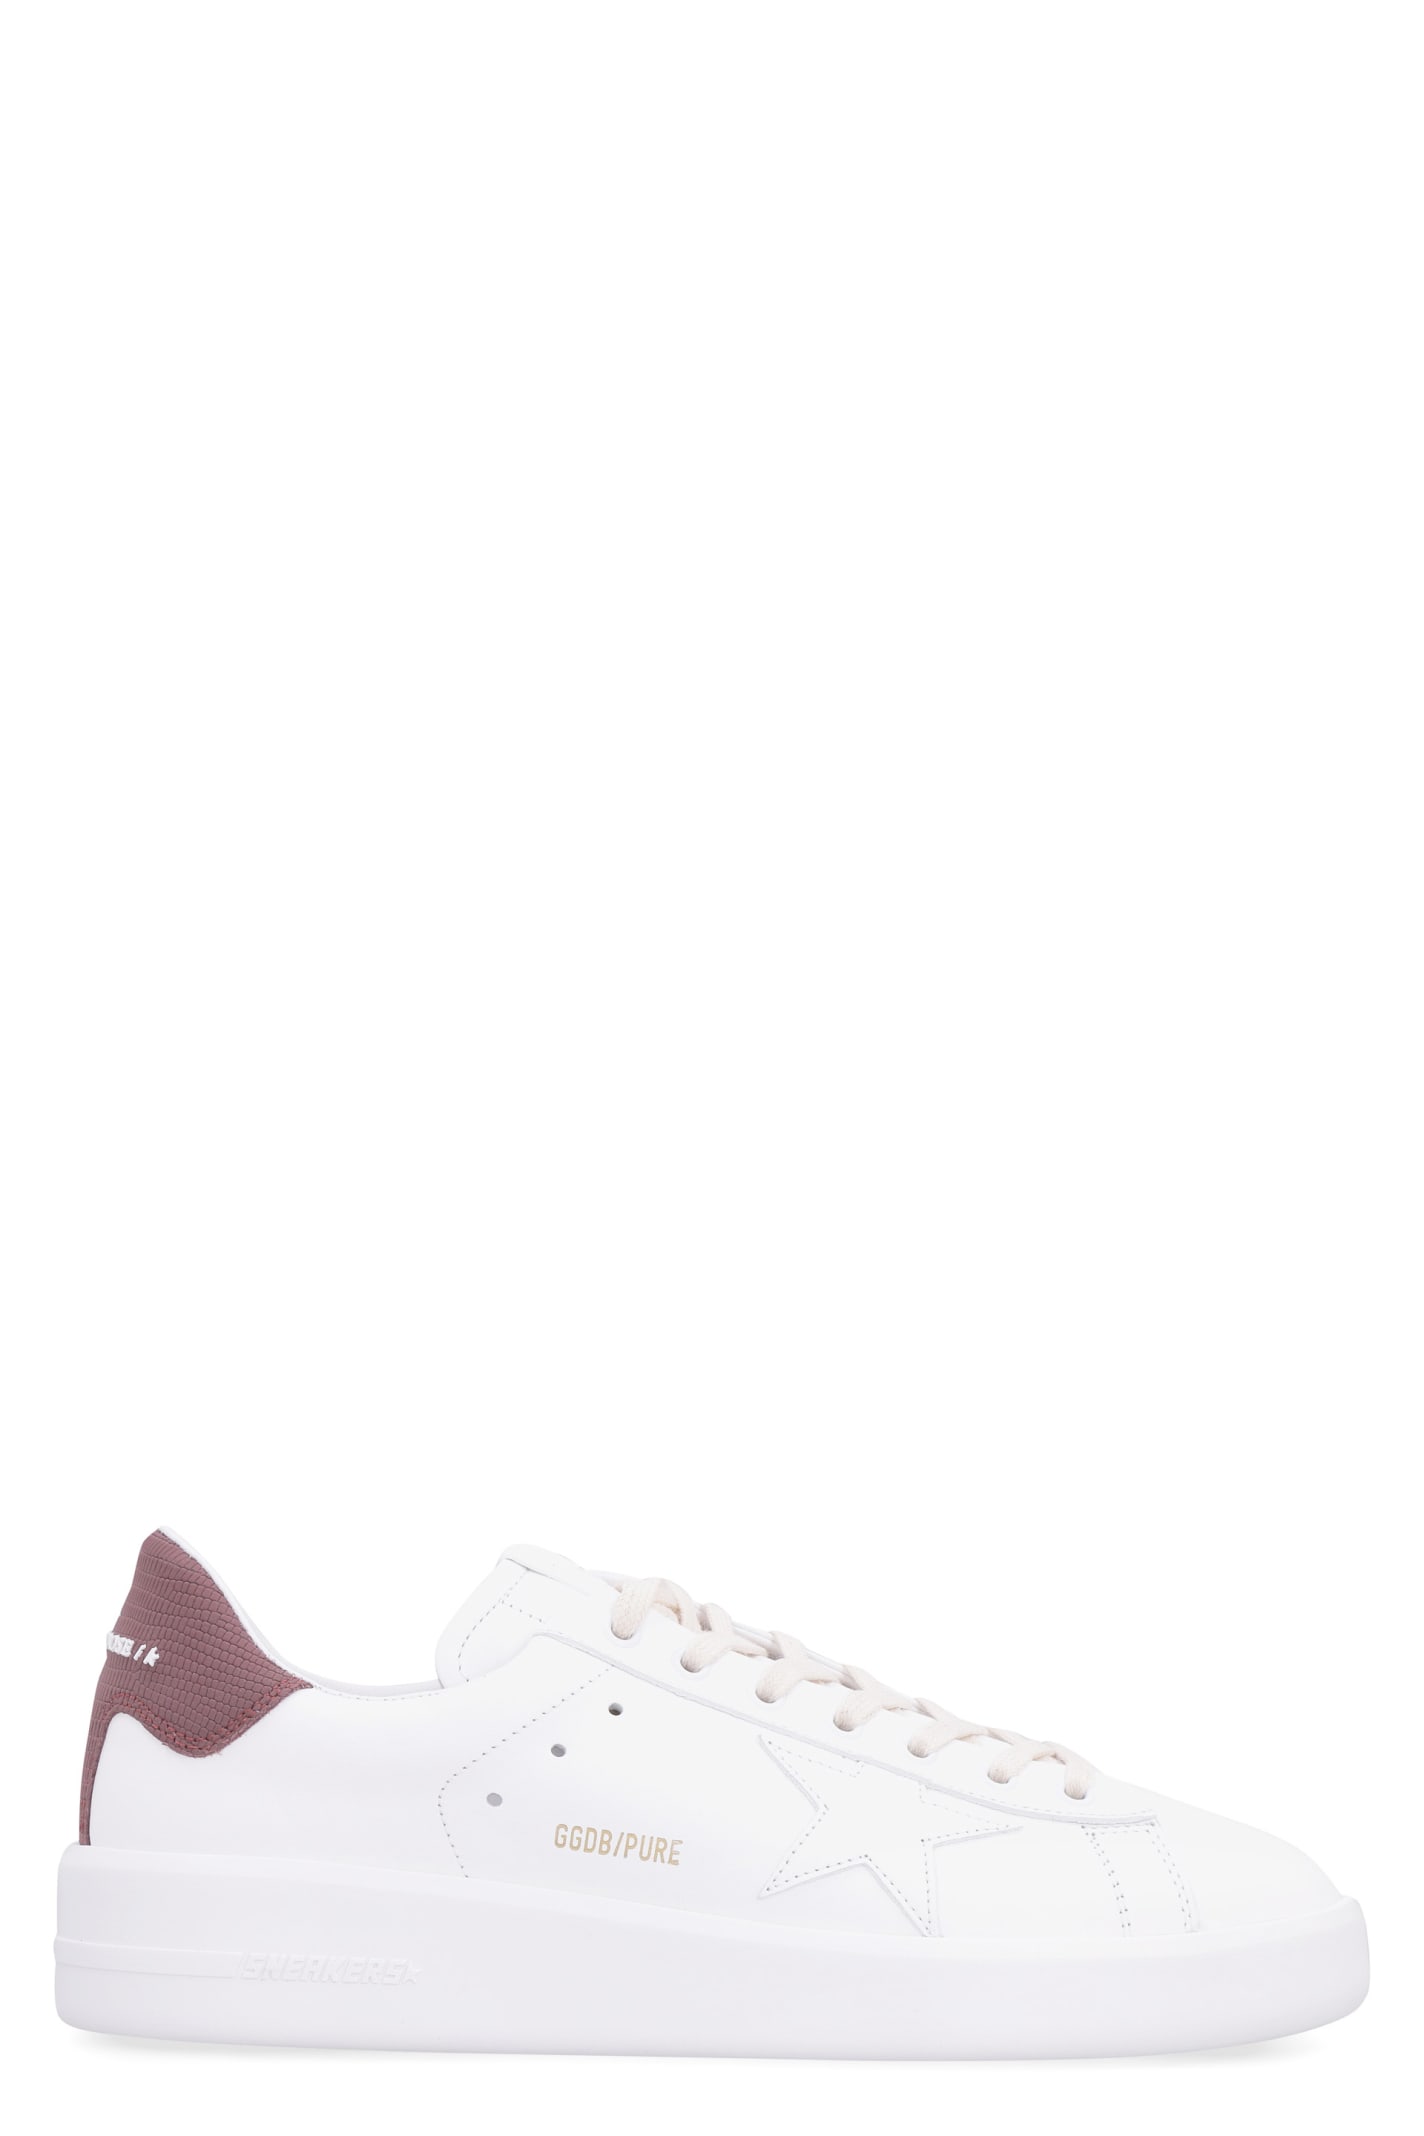 Shop Golden Goose Pure New Leather Low-top Sneakers In White/bordeaux